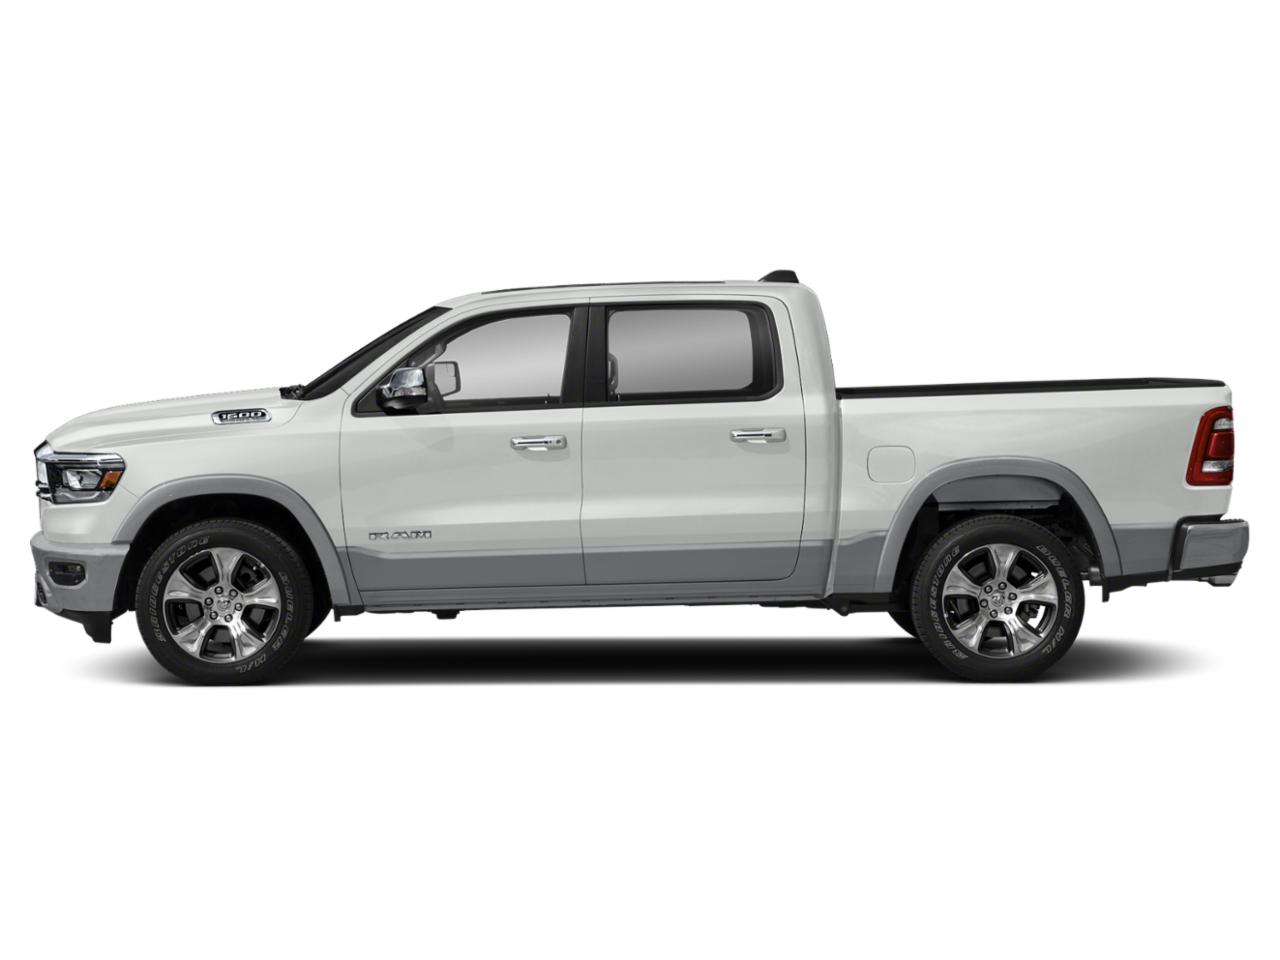 2019 Ram 1500 Vehicle Photo in Ft. Myers, FL 33907